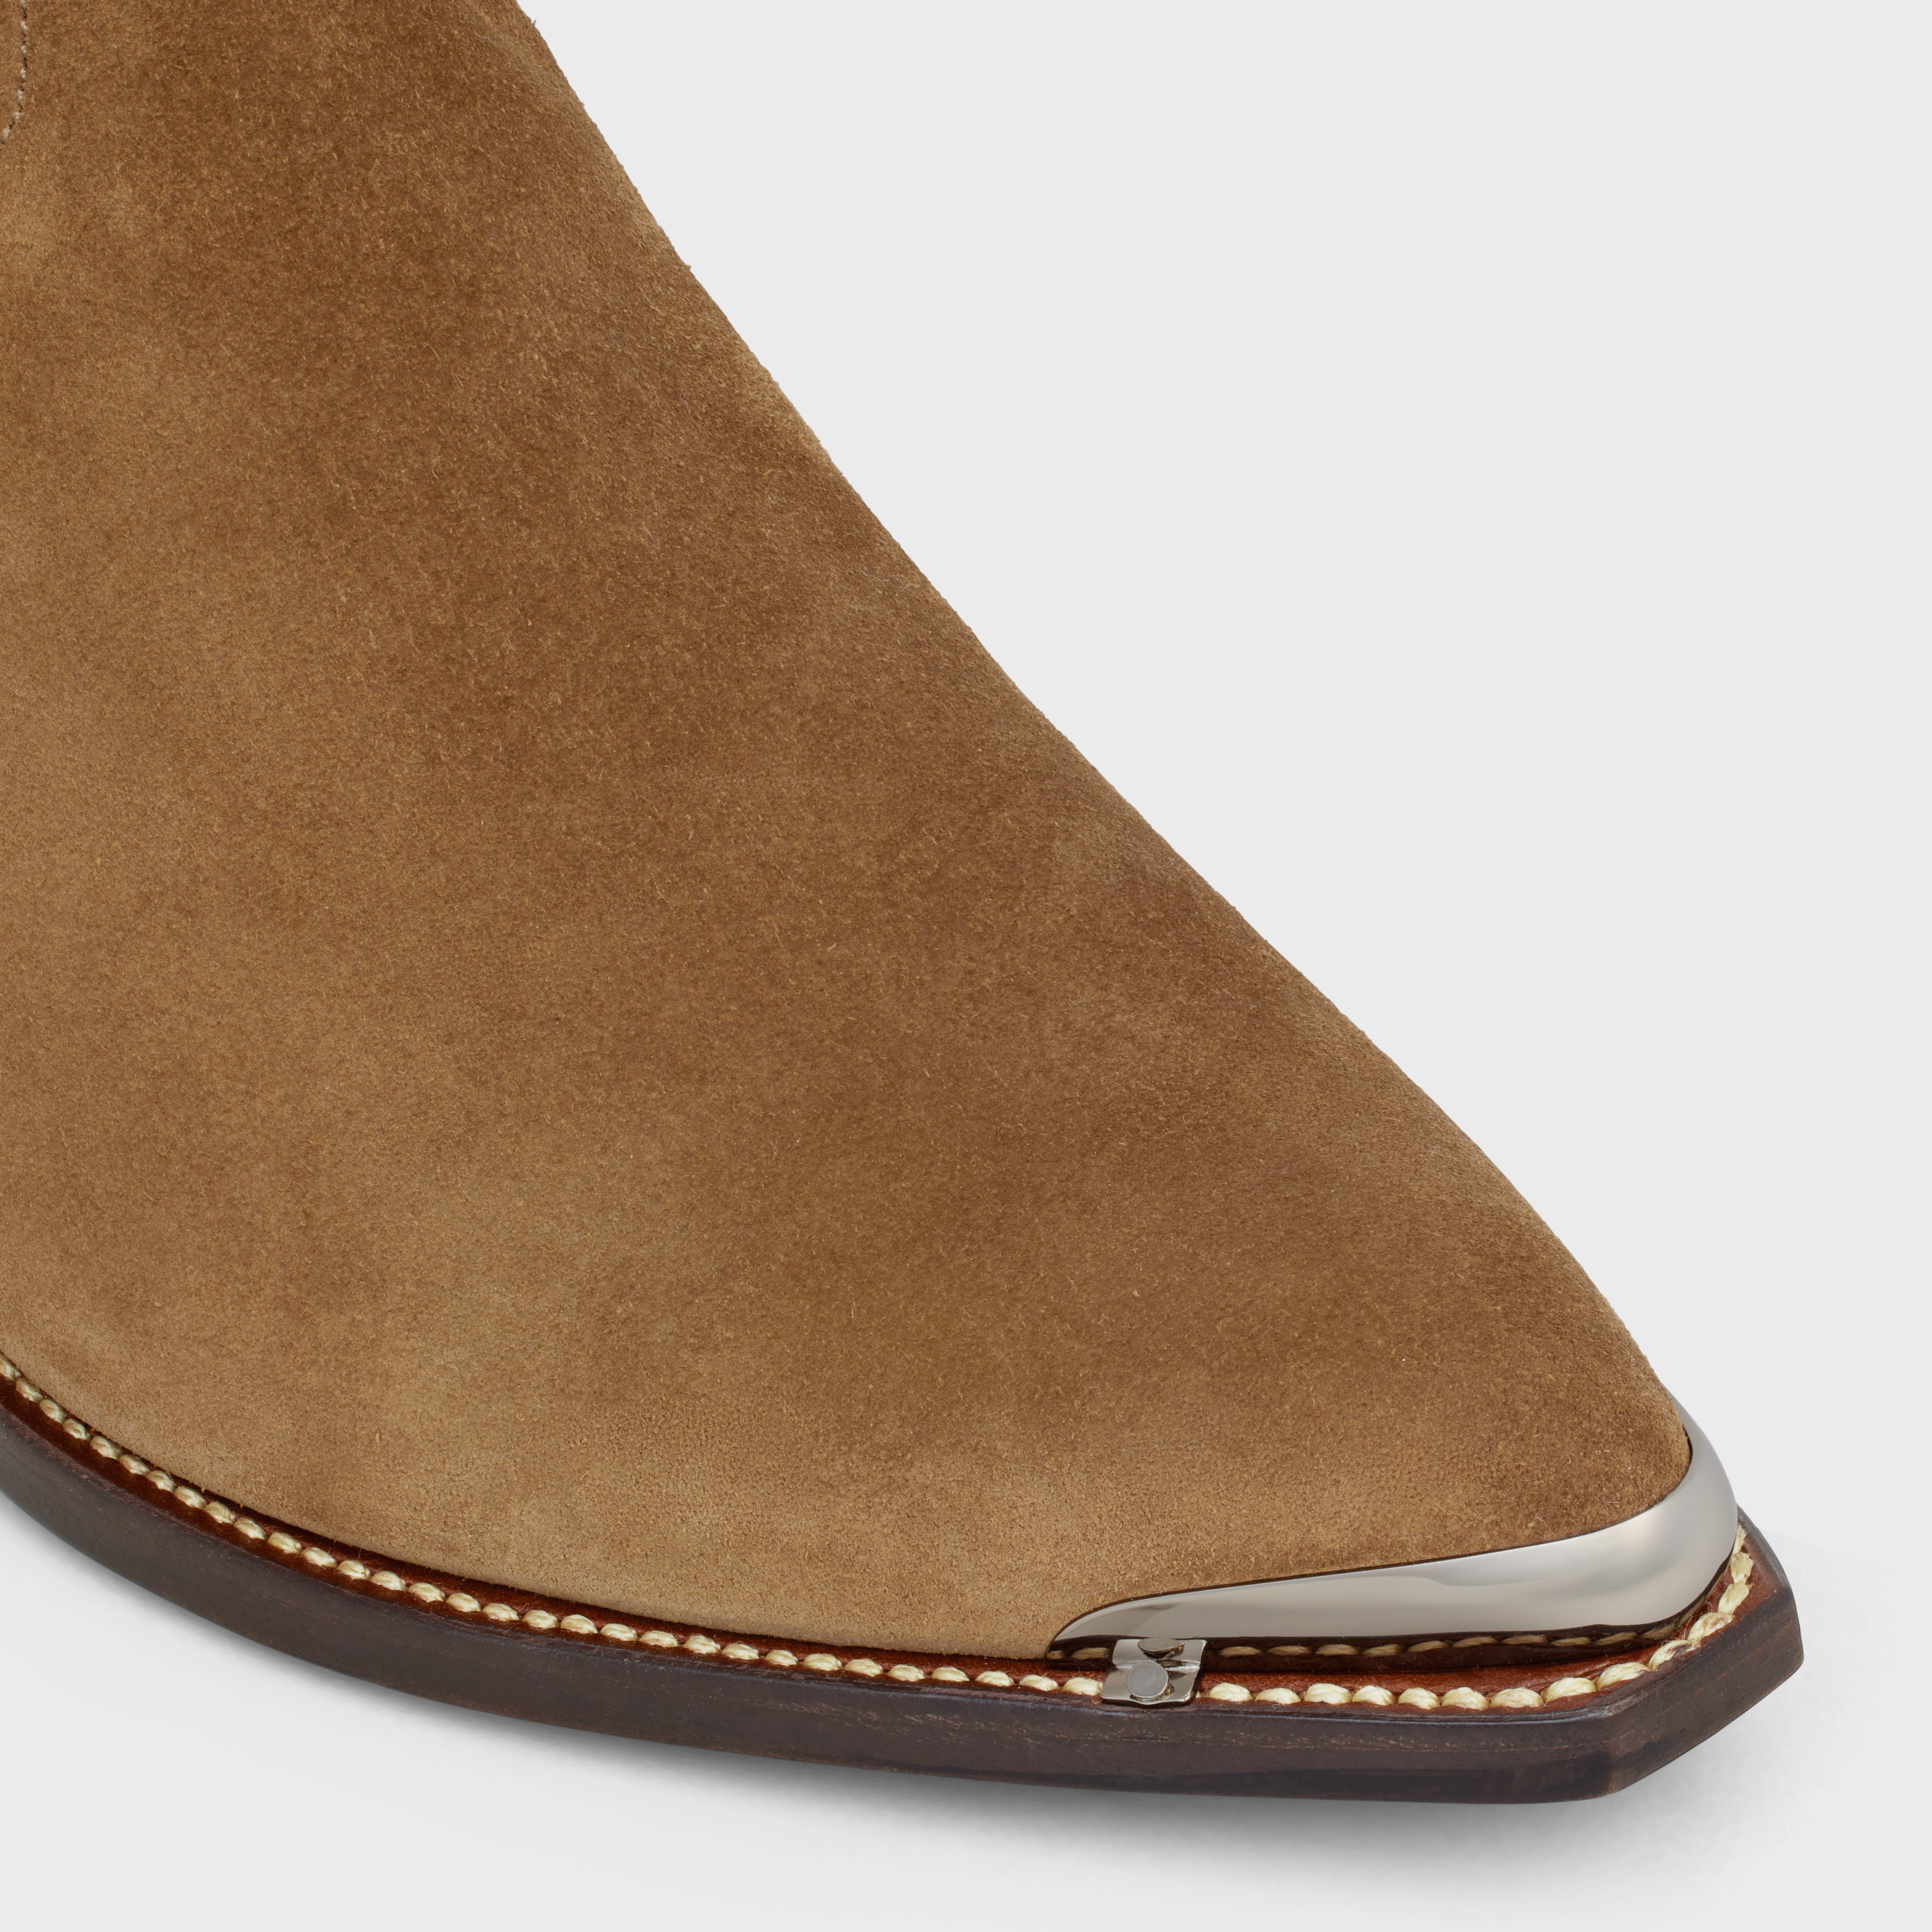 CRUISER BOOTS CHELSEA BOOT WITH METAL TOE in Suede Calfskin - 4